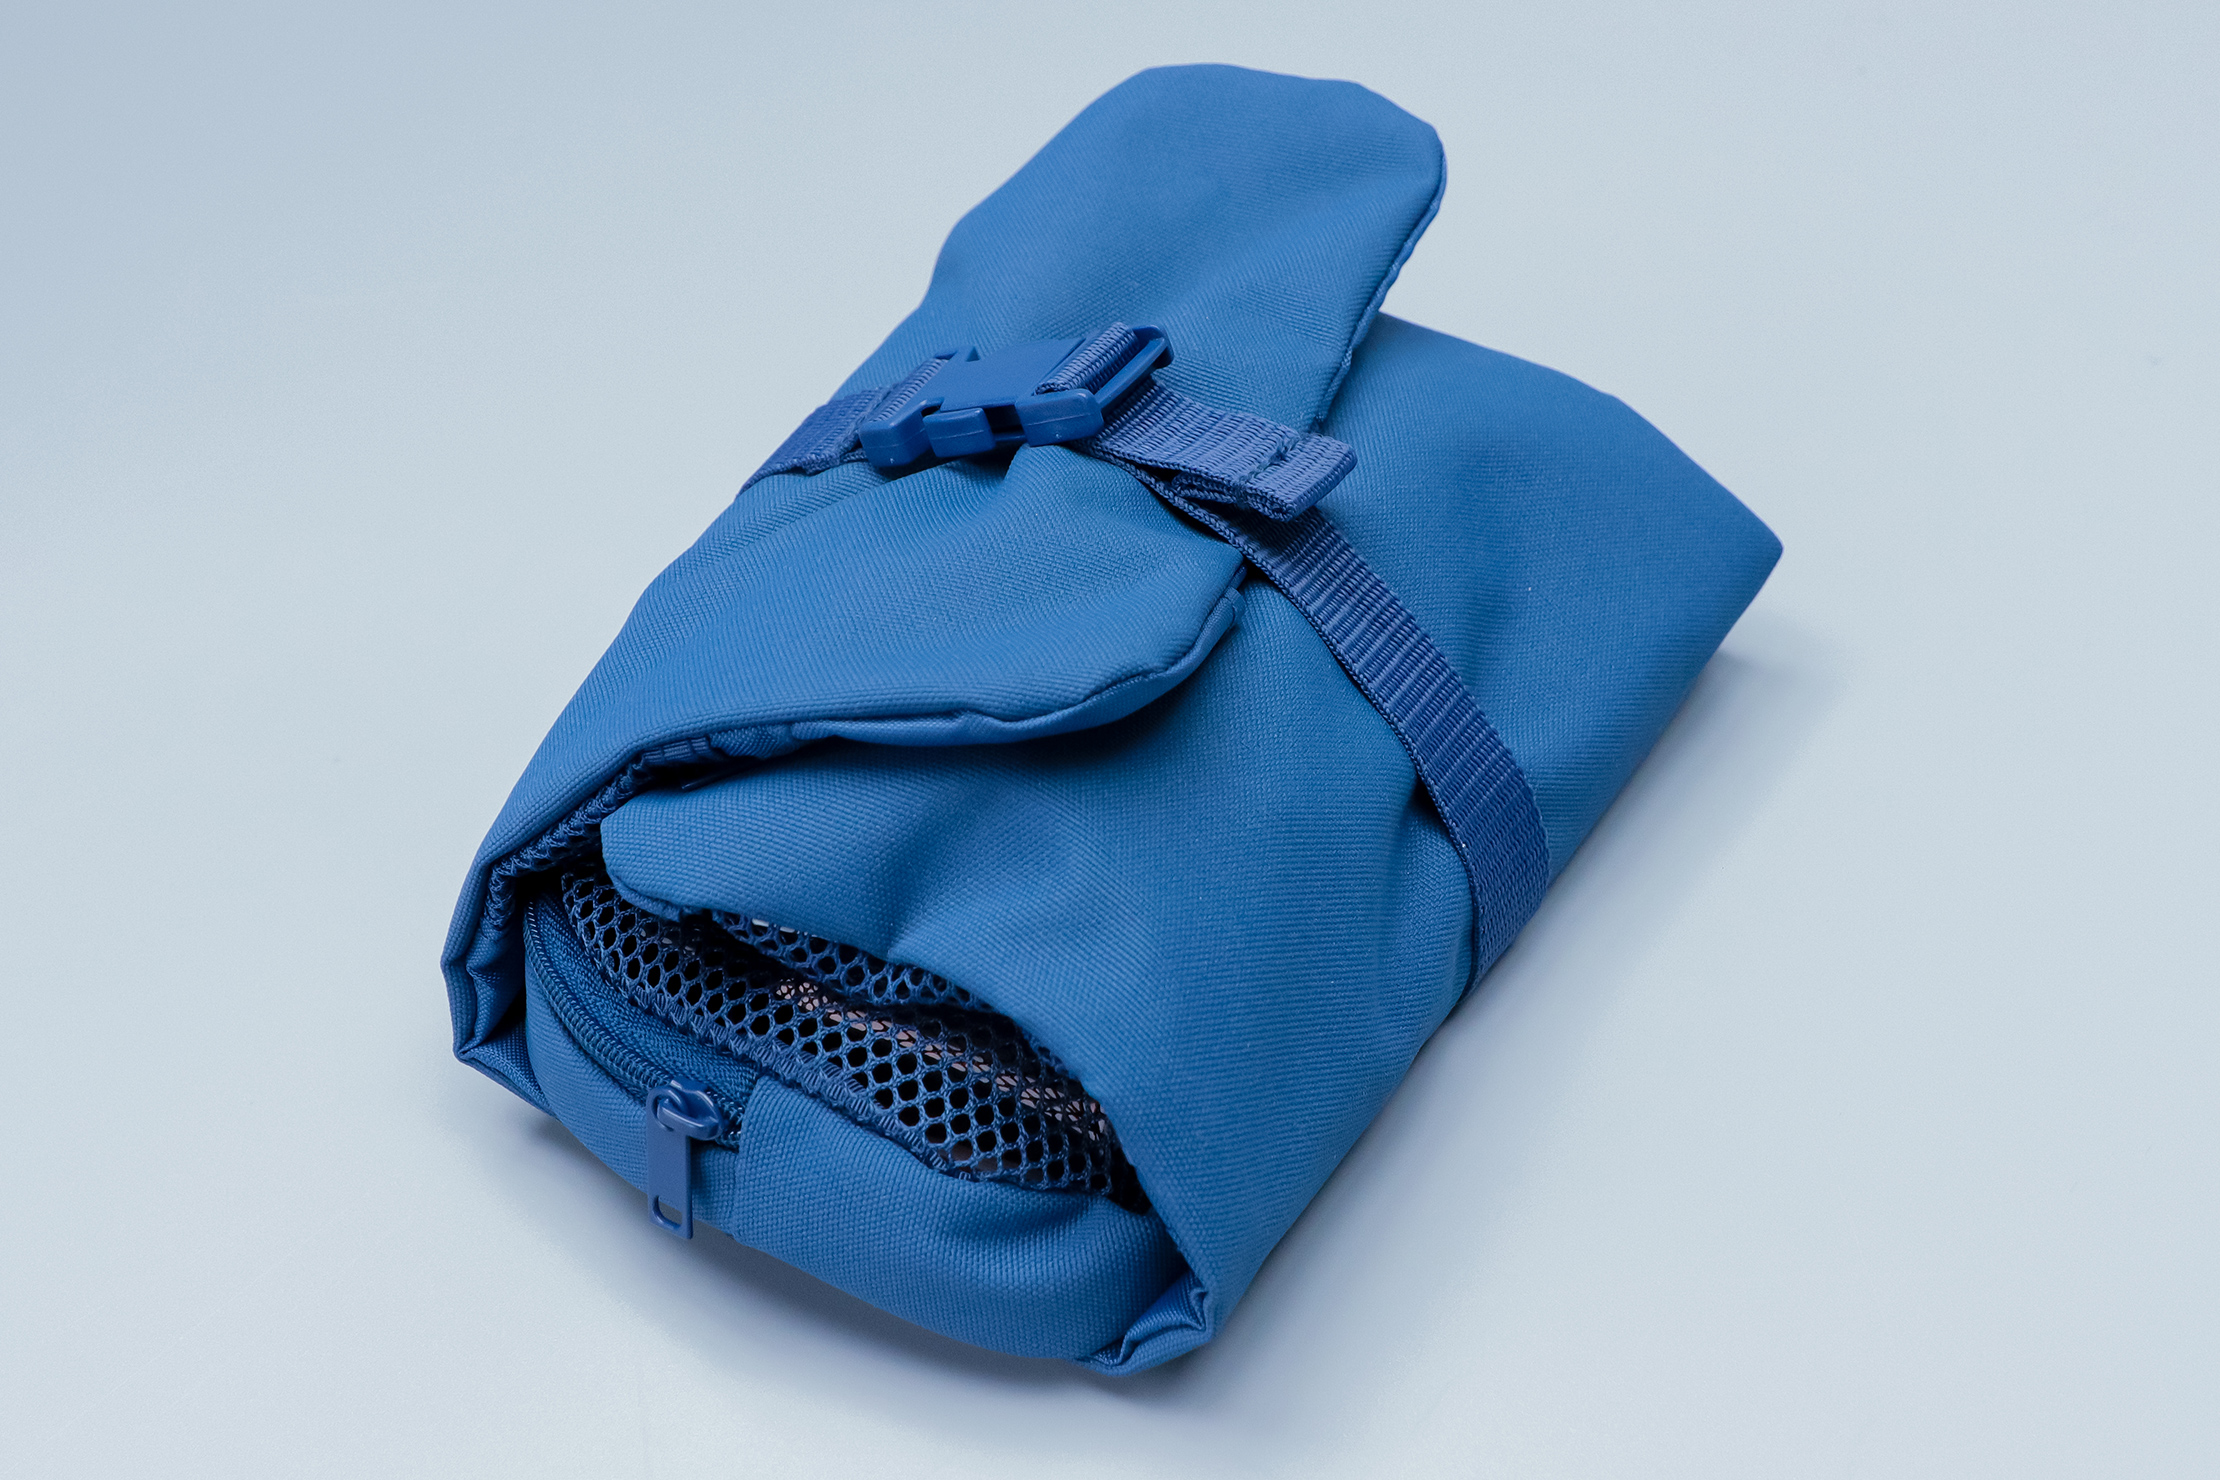 Muji Hanging Case With Pouch overpacked burrito